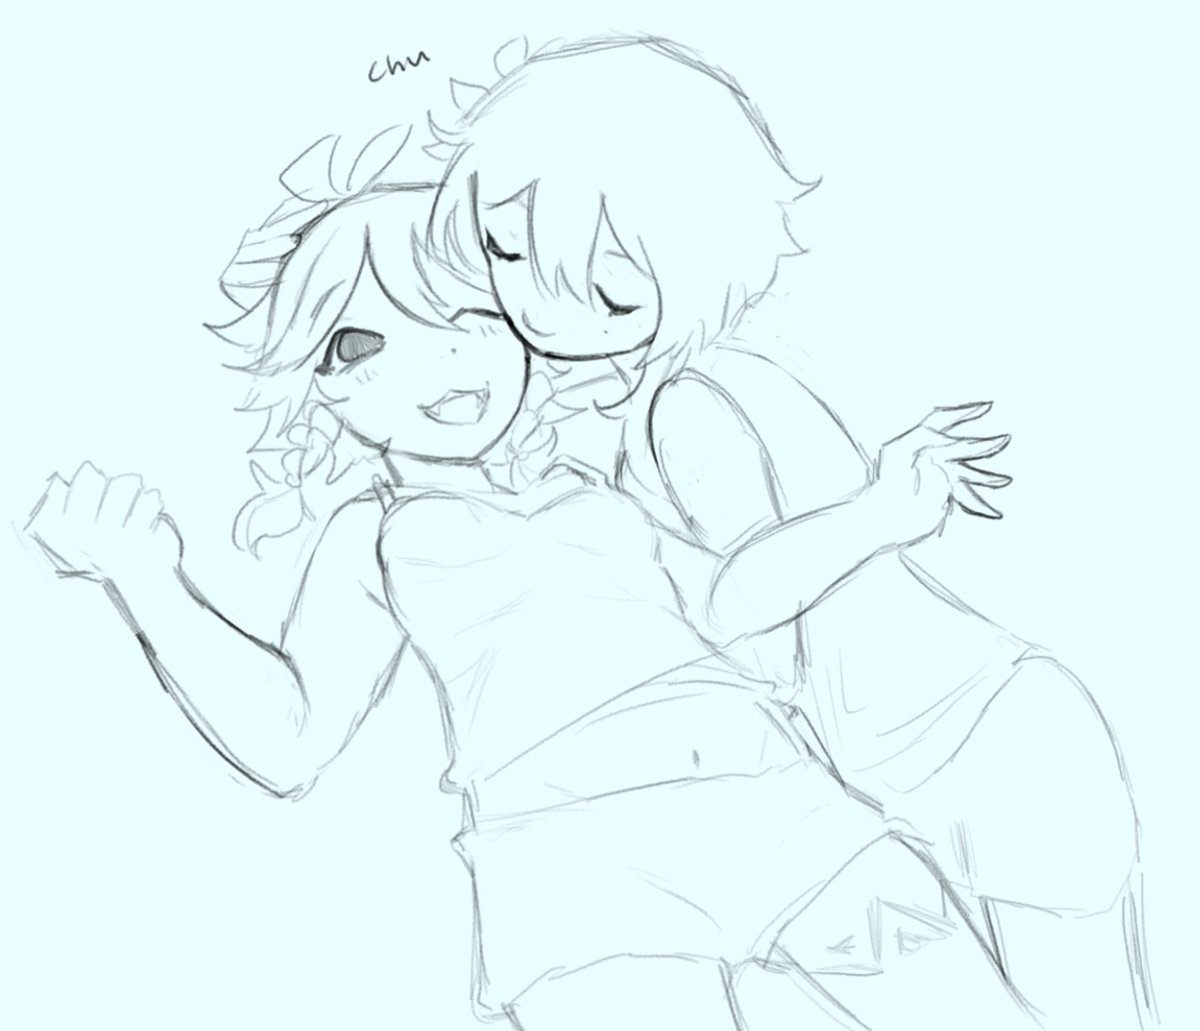 venlumi doodle before the urge to draw venticchino comes back to haunt me